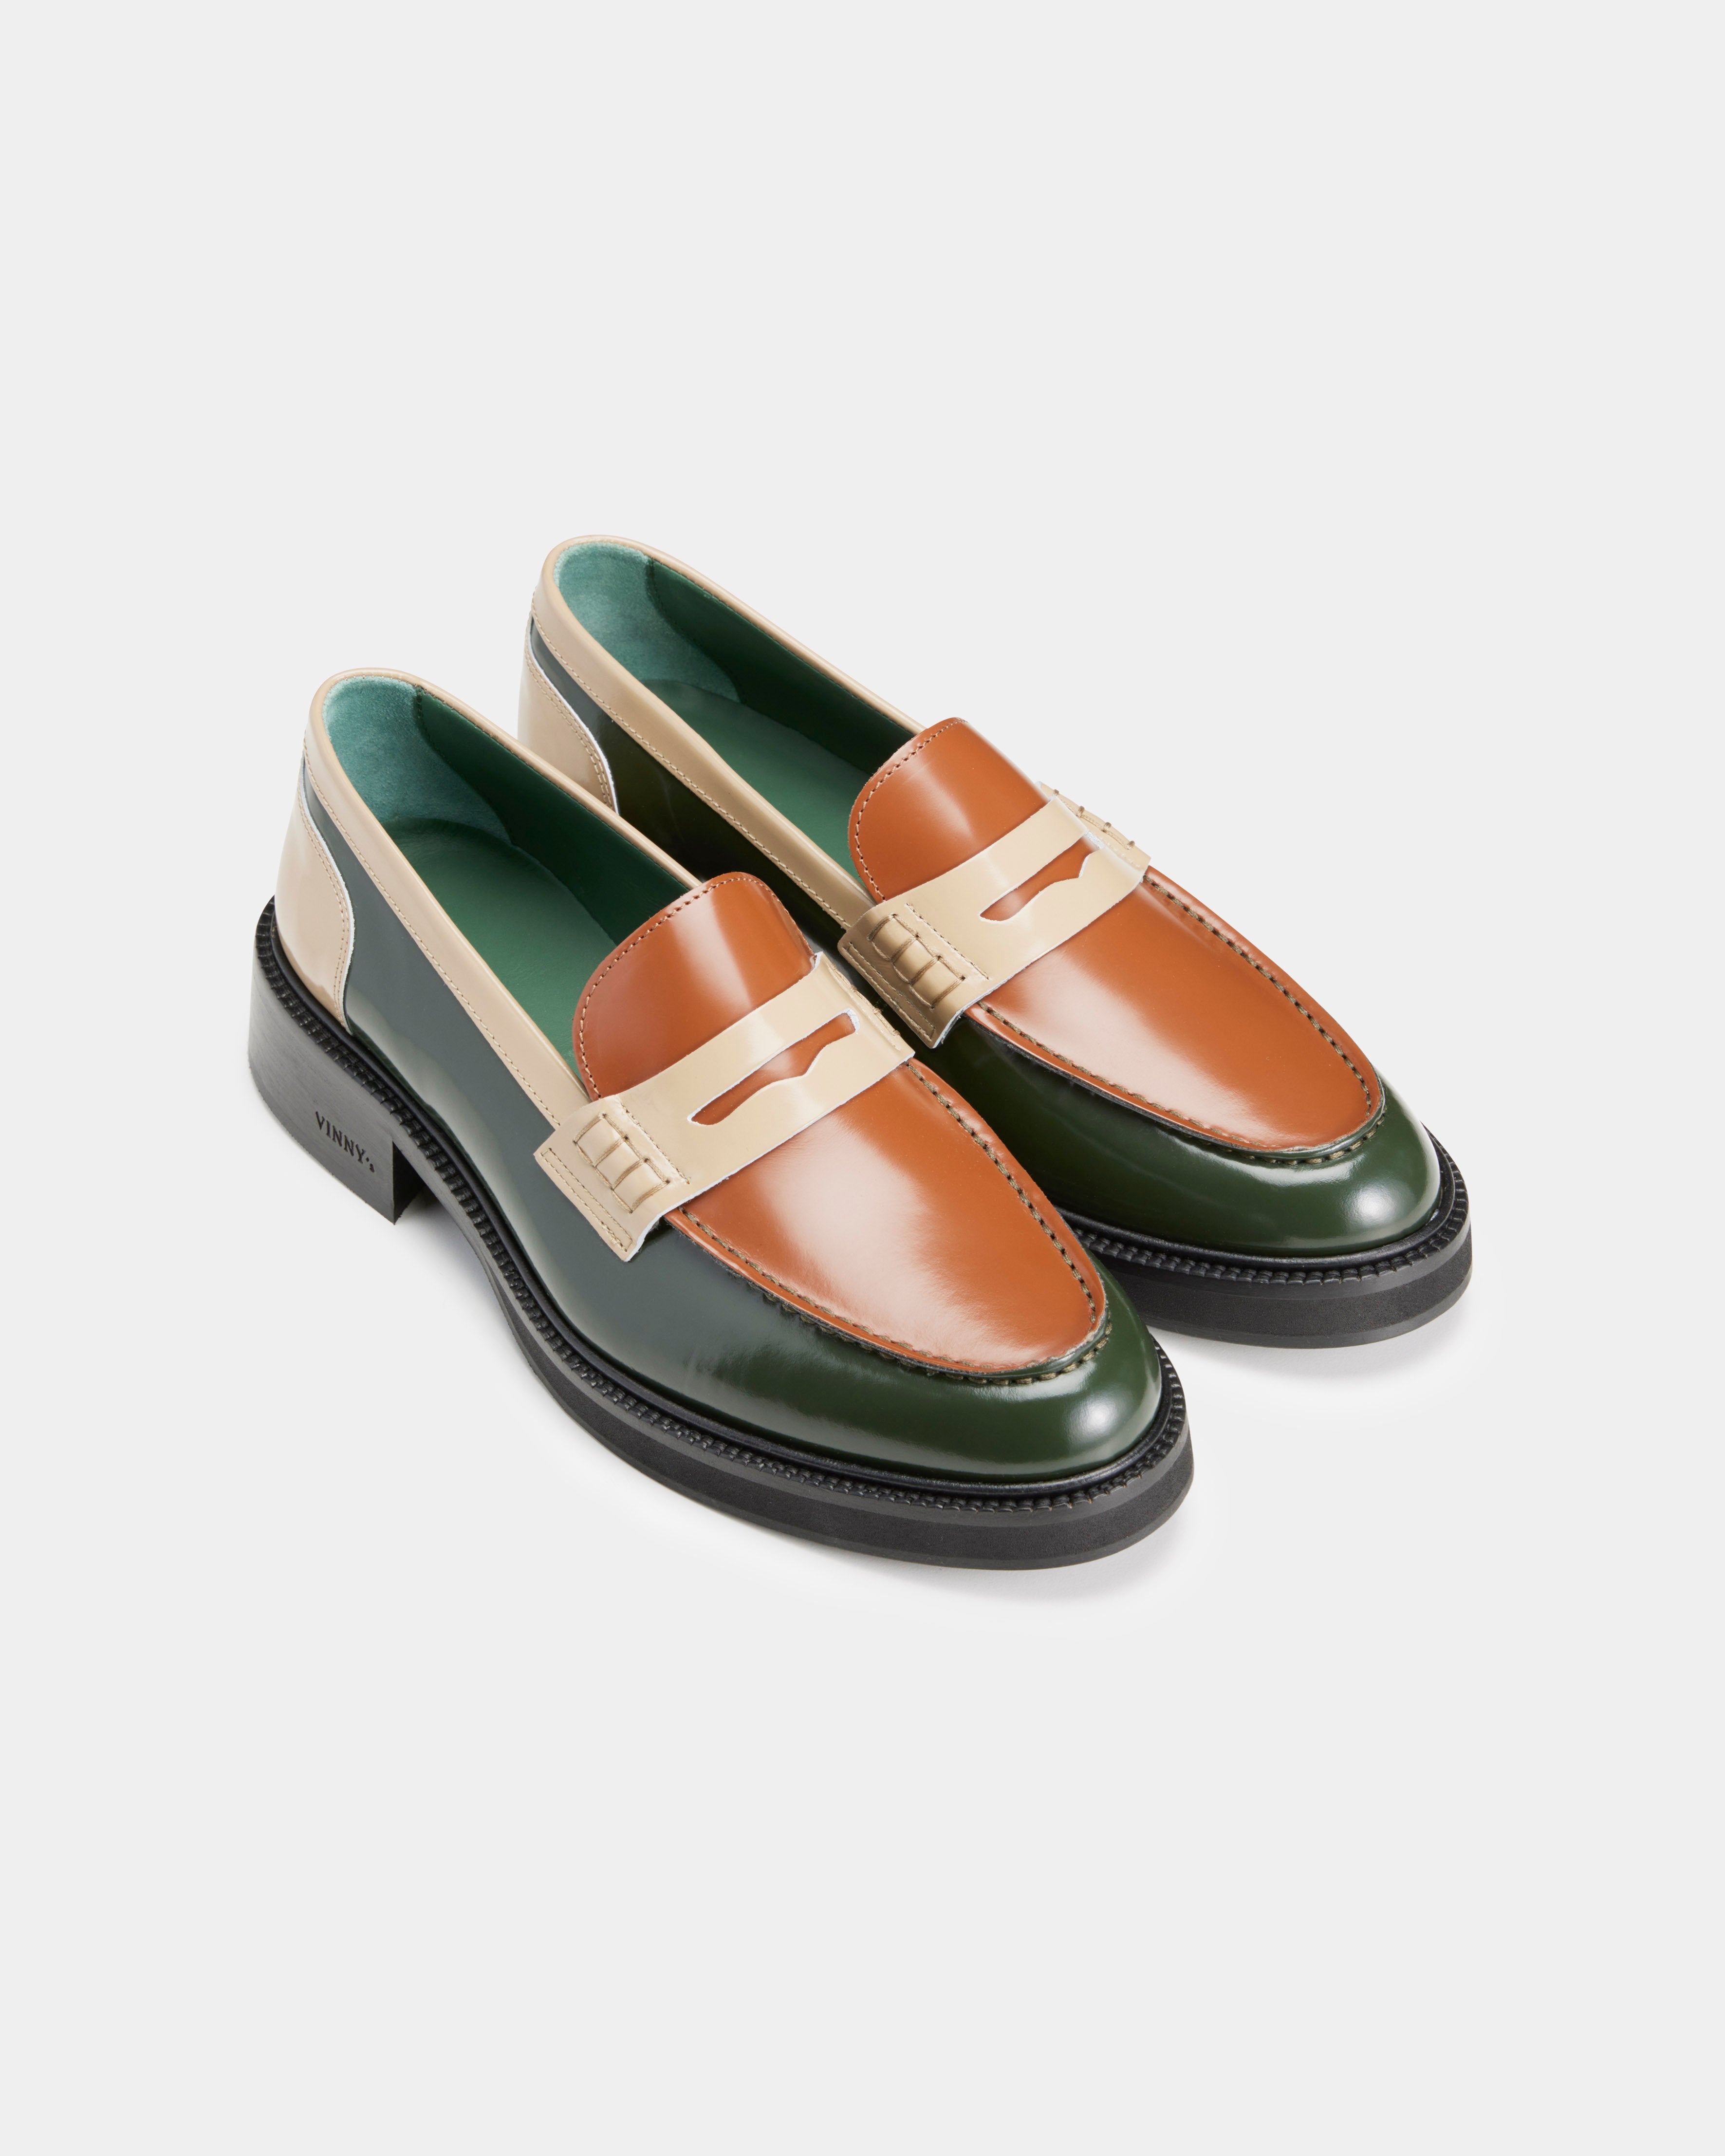 mens heeled townee in green, champagne and white